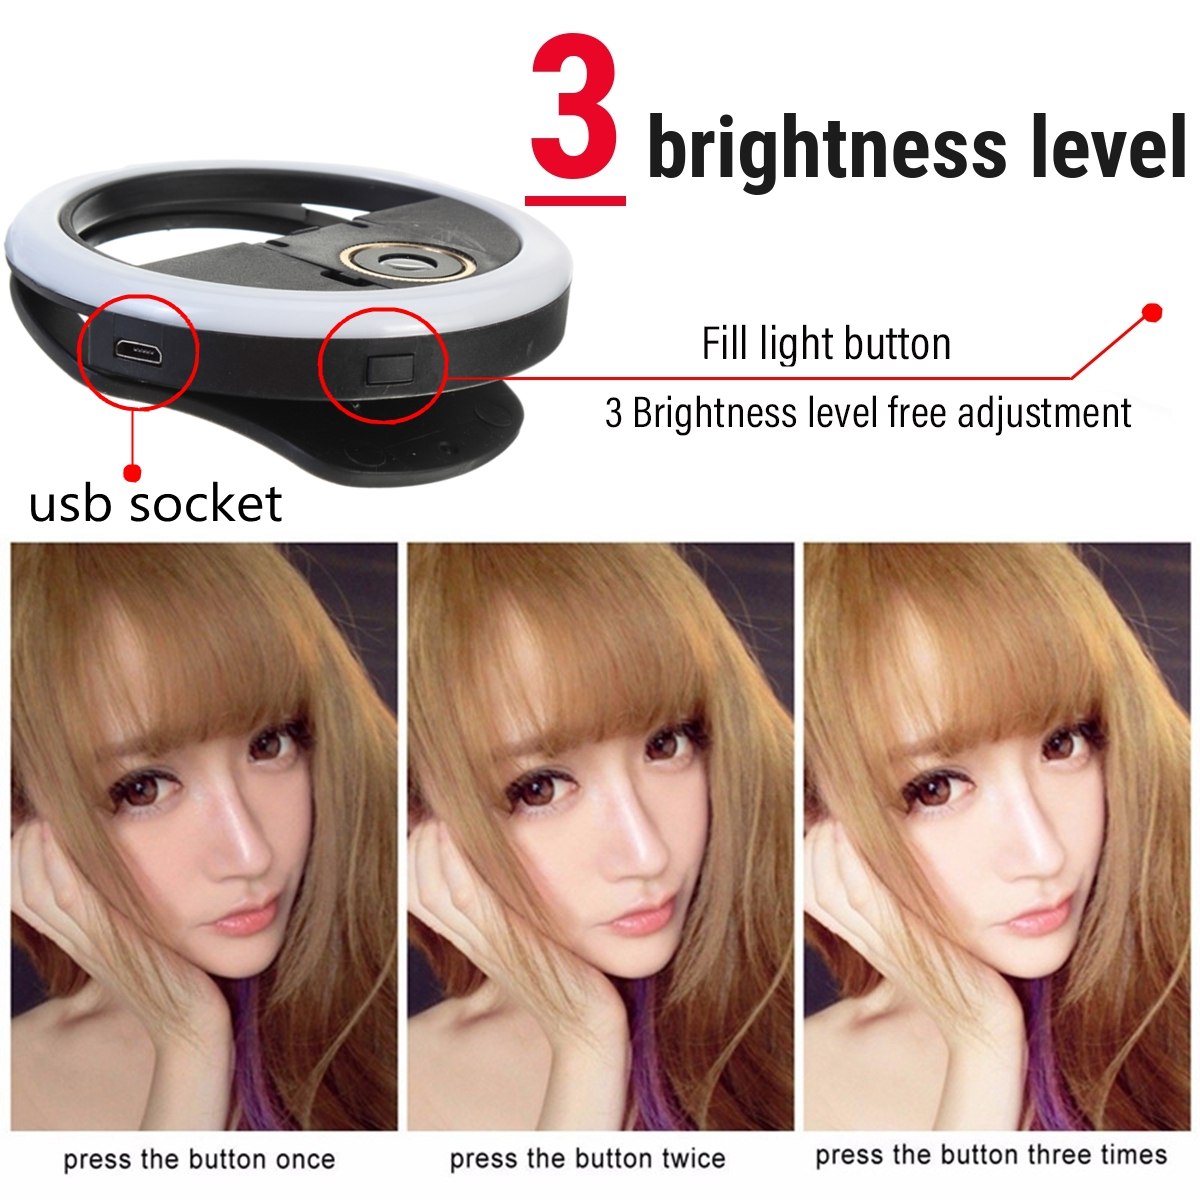 Bakeey-Selfie-36-LED-Fill-Lamp-Ring-Light-Universal-Clip-3-levels-Brightness-Micro-063-x-HD-Wide-ang-1746950-6